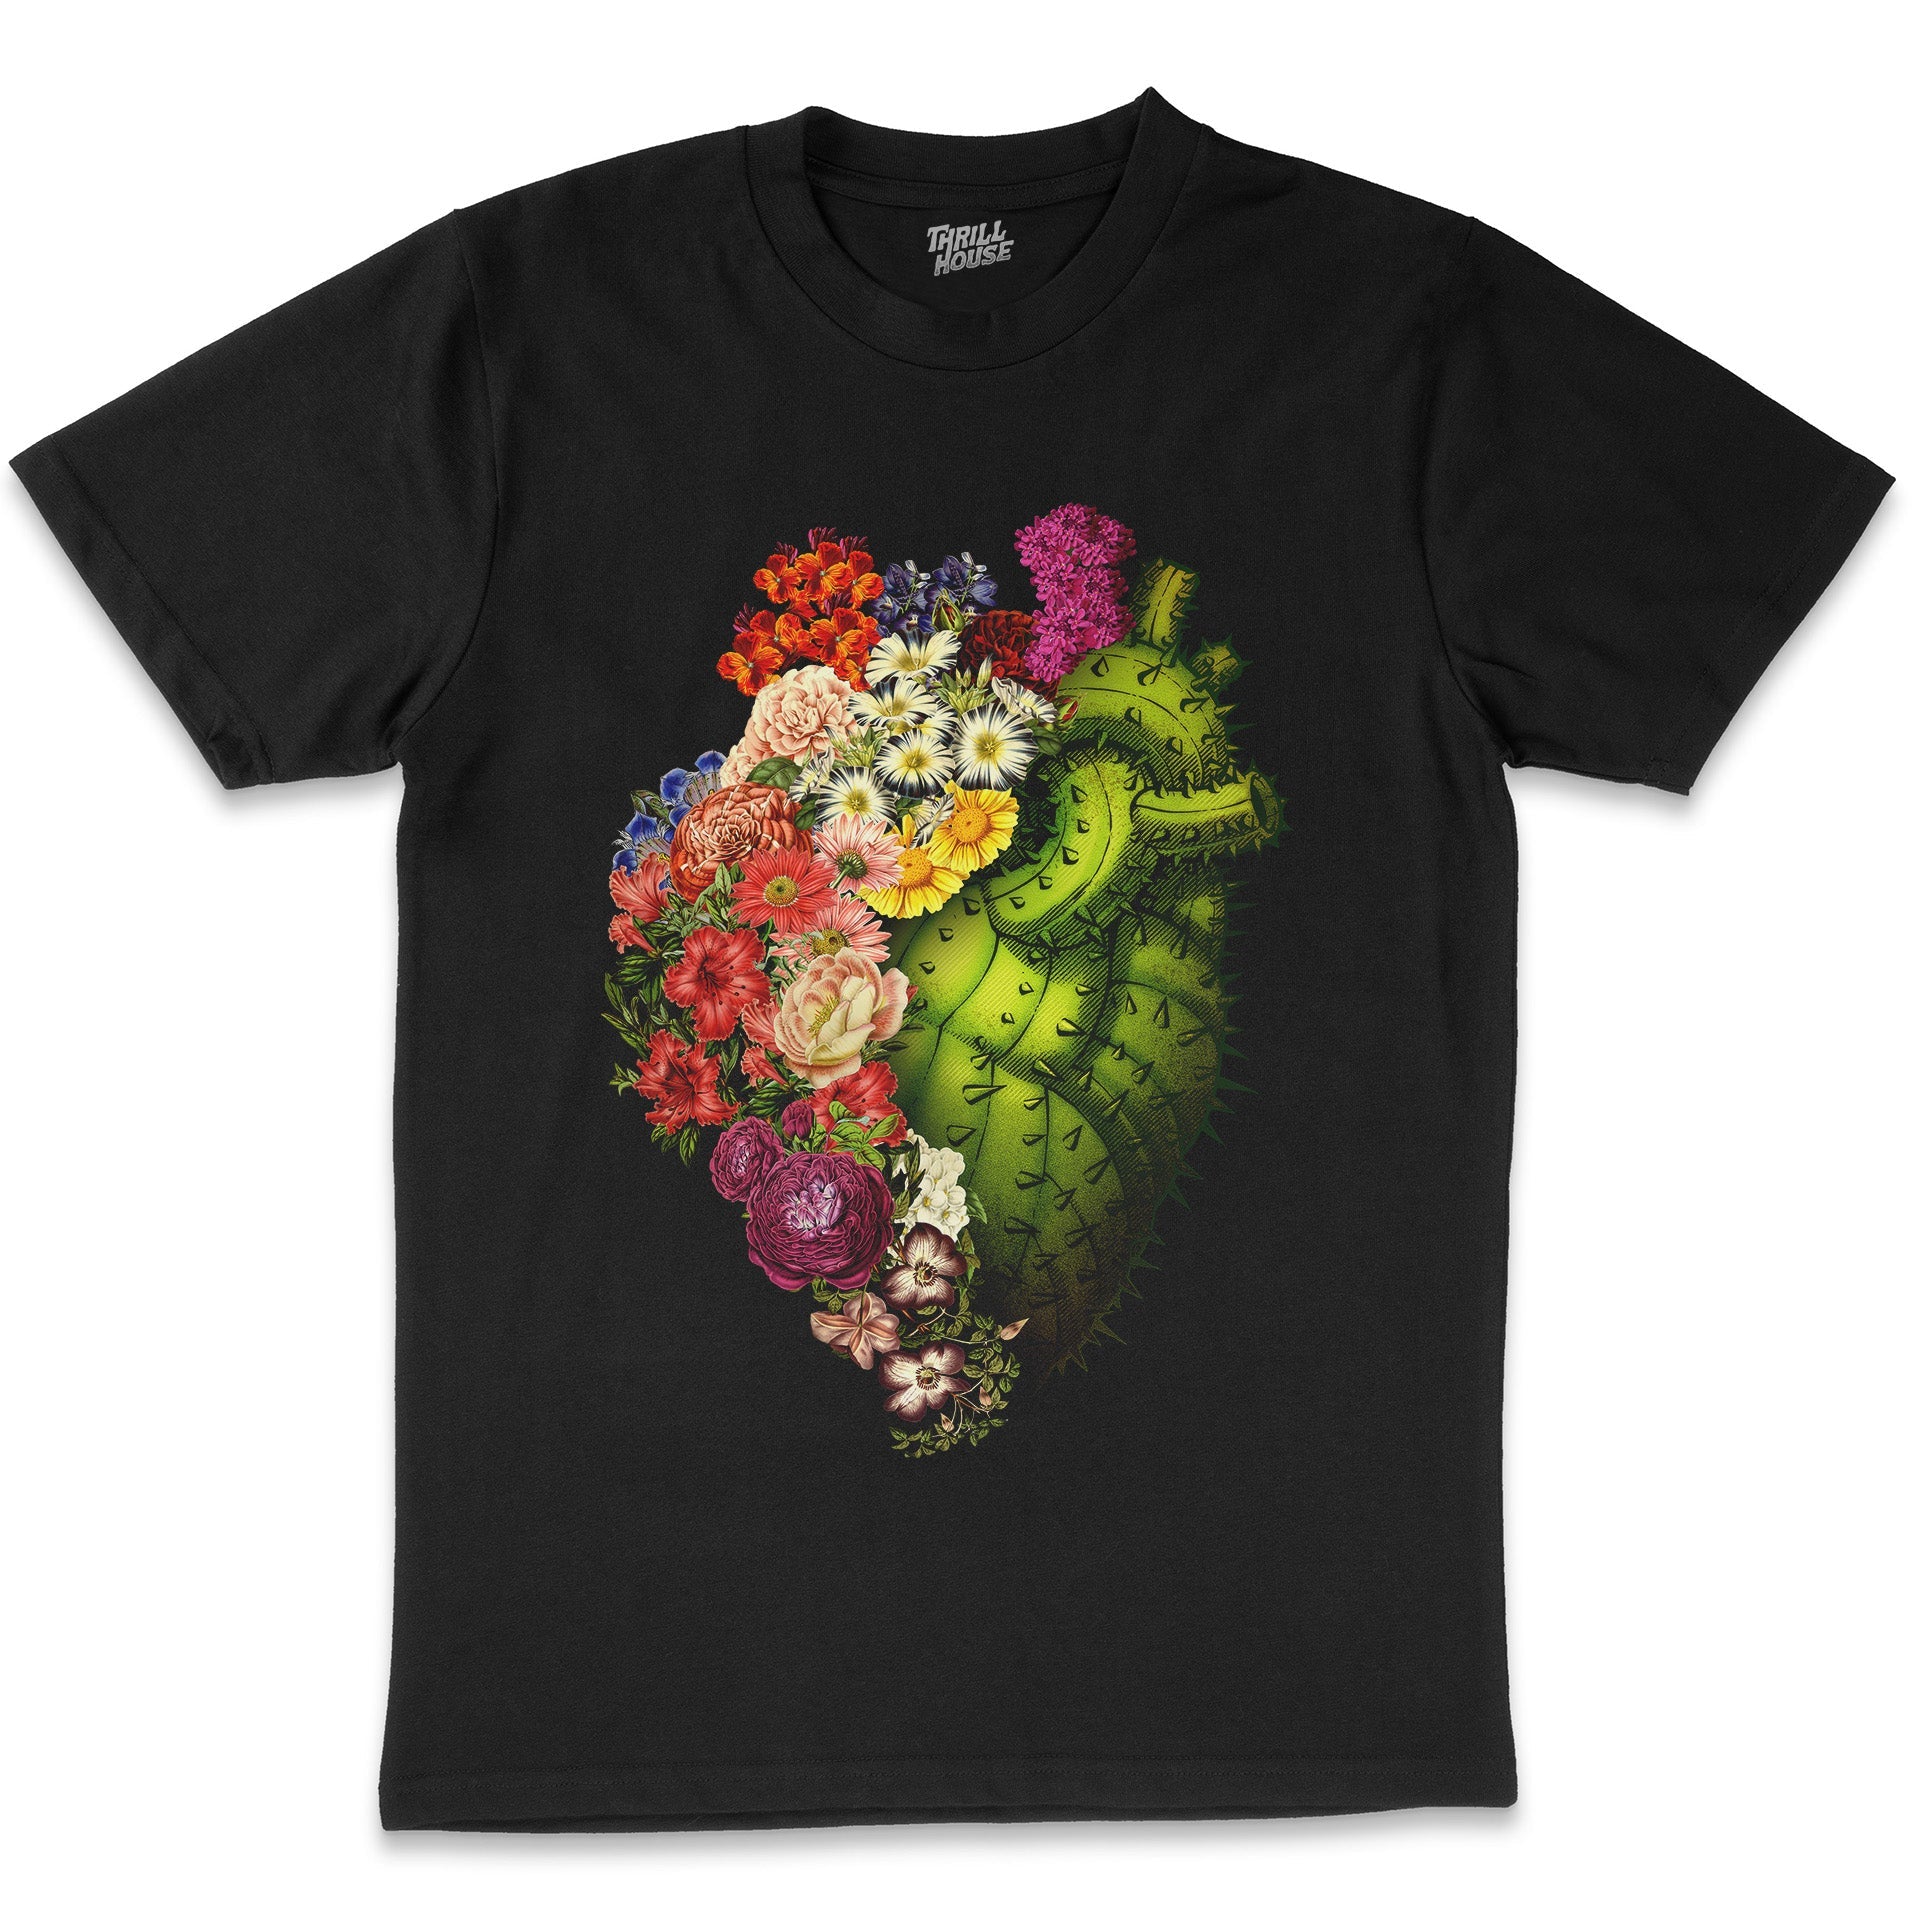 Healing Heart Floral Nature Flowers Artsy Anatomy Cool Design Love Cotton T-Shirt